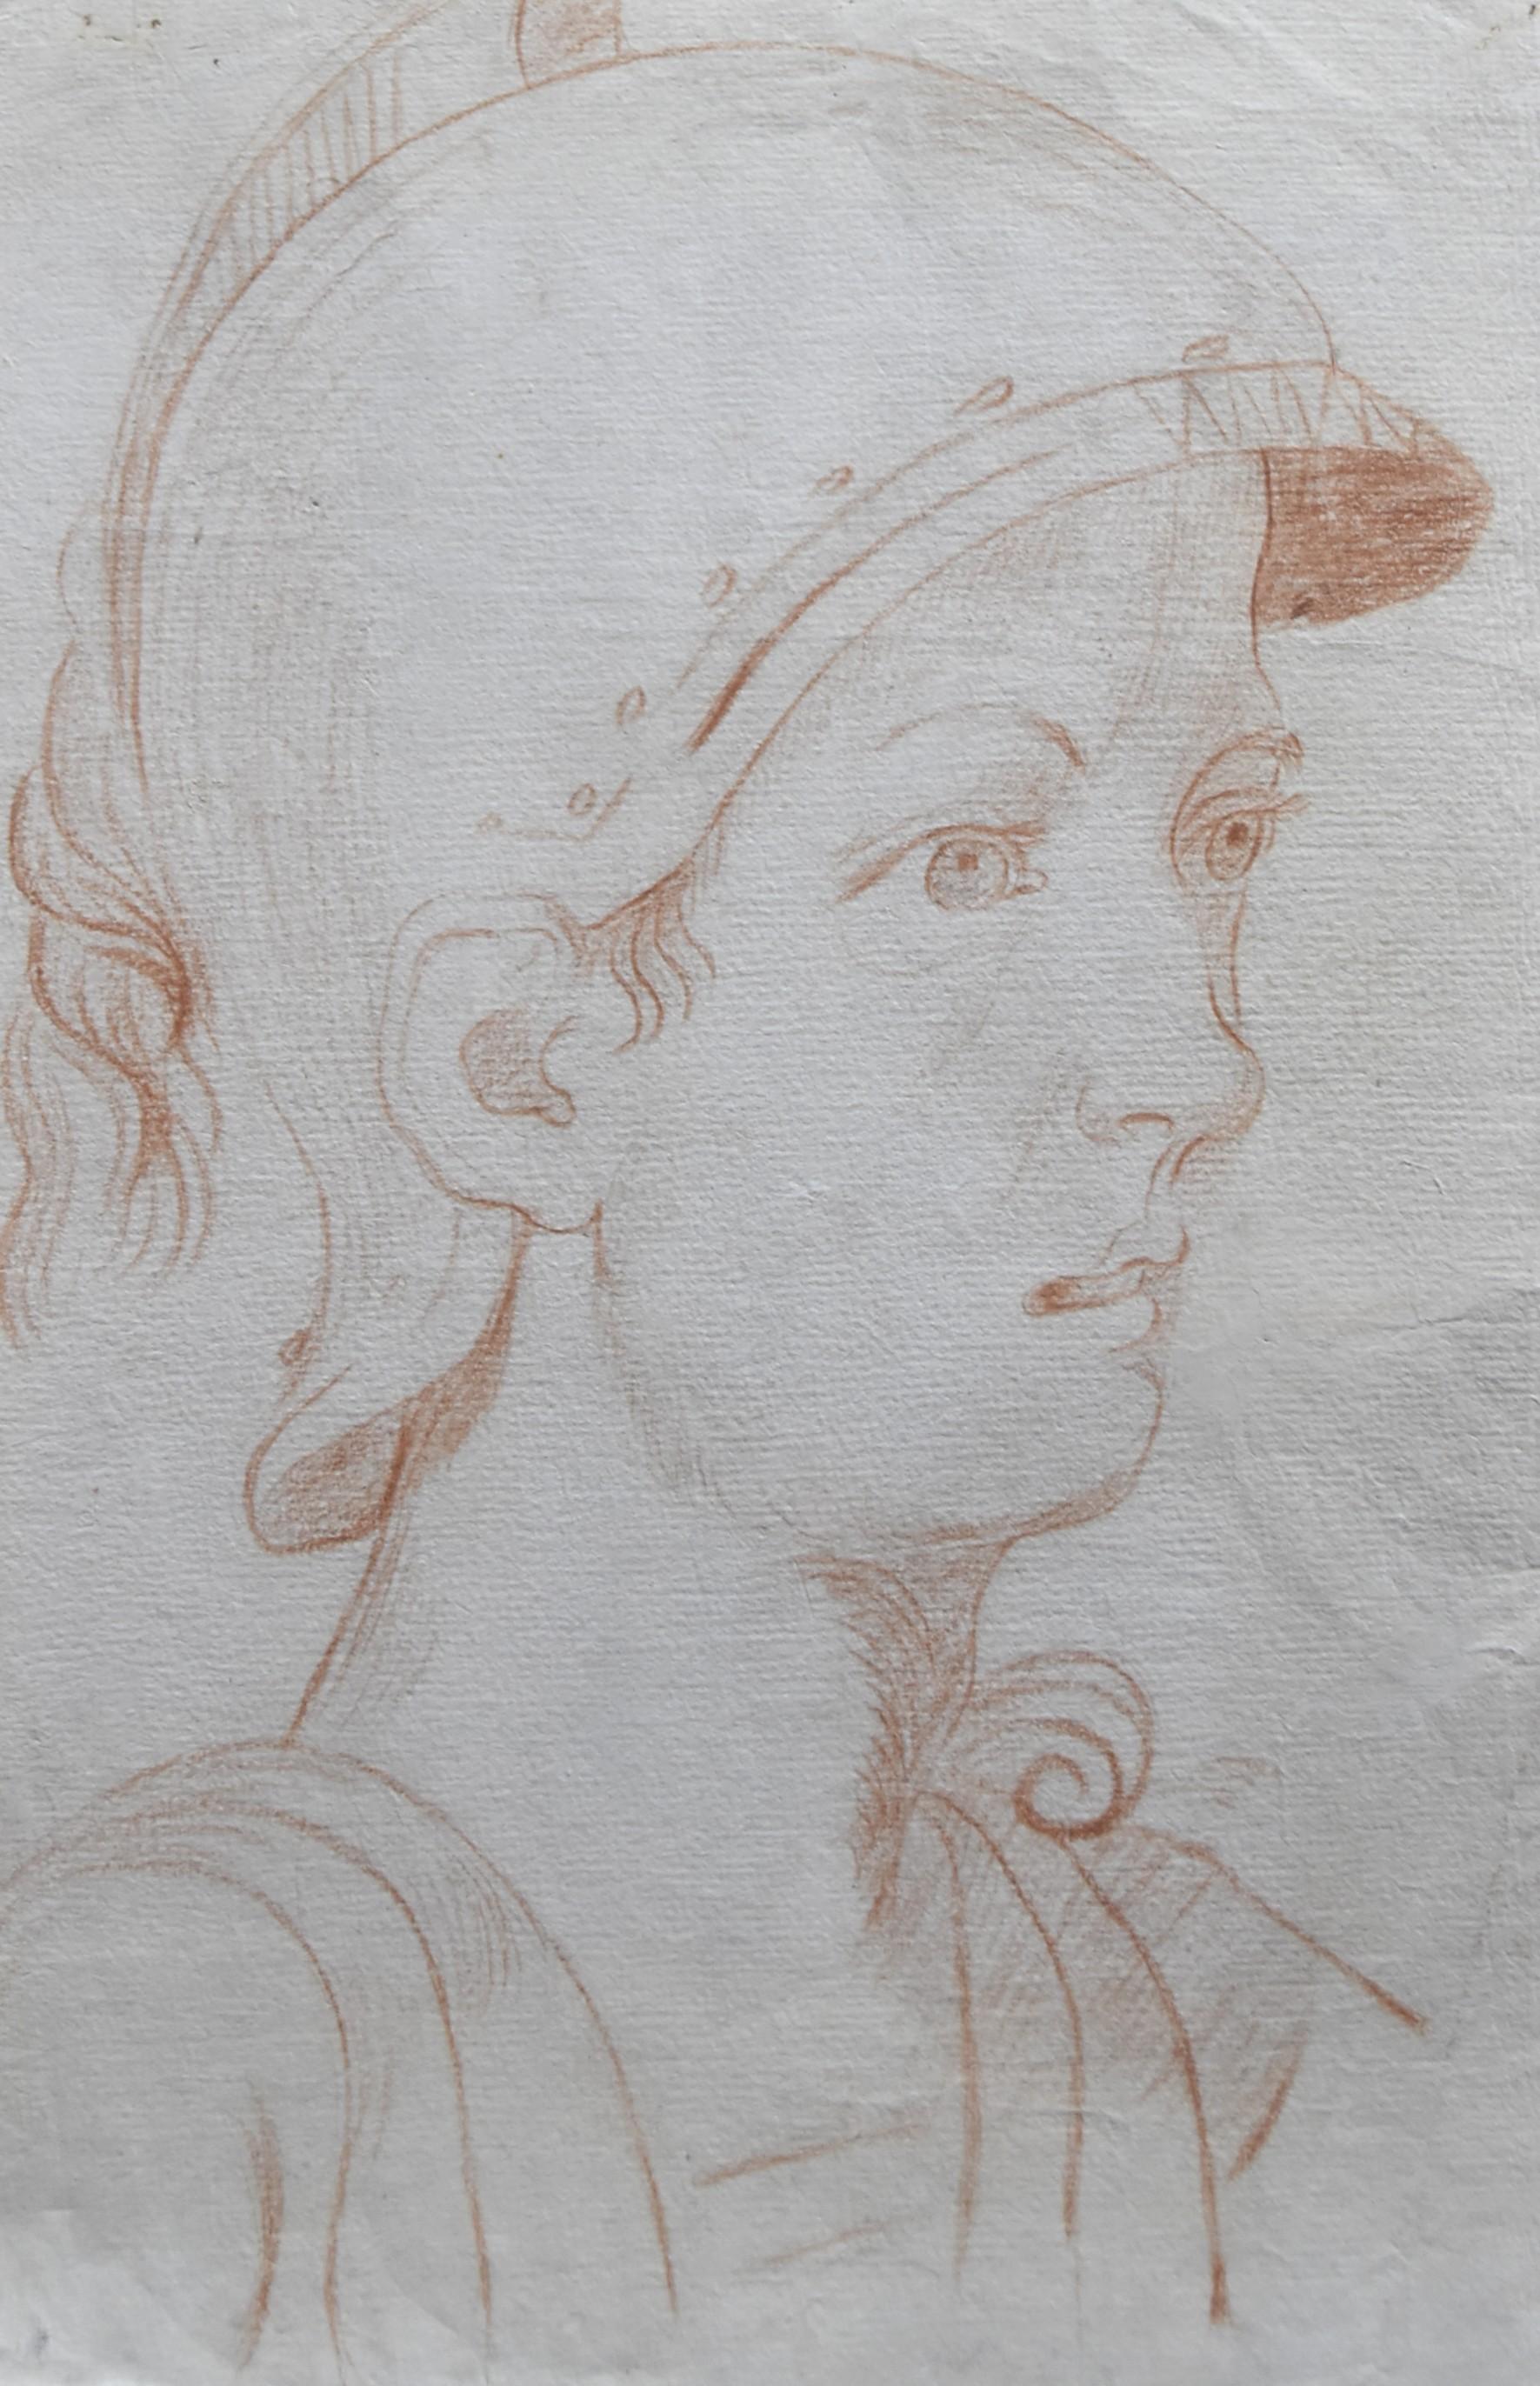 Italian School 18th century,  An Ancient soldier in profile, red chalk on paper